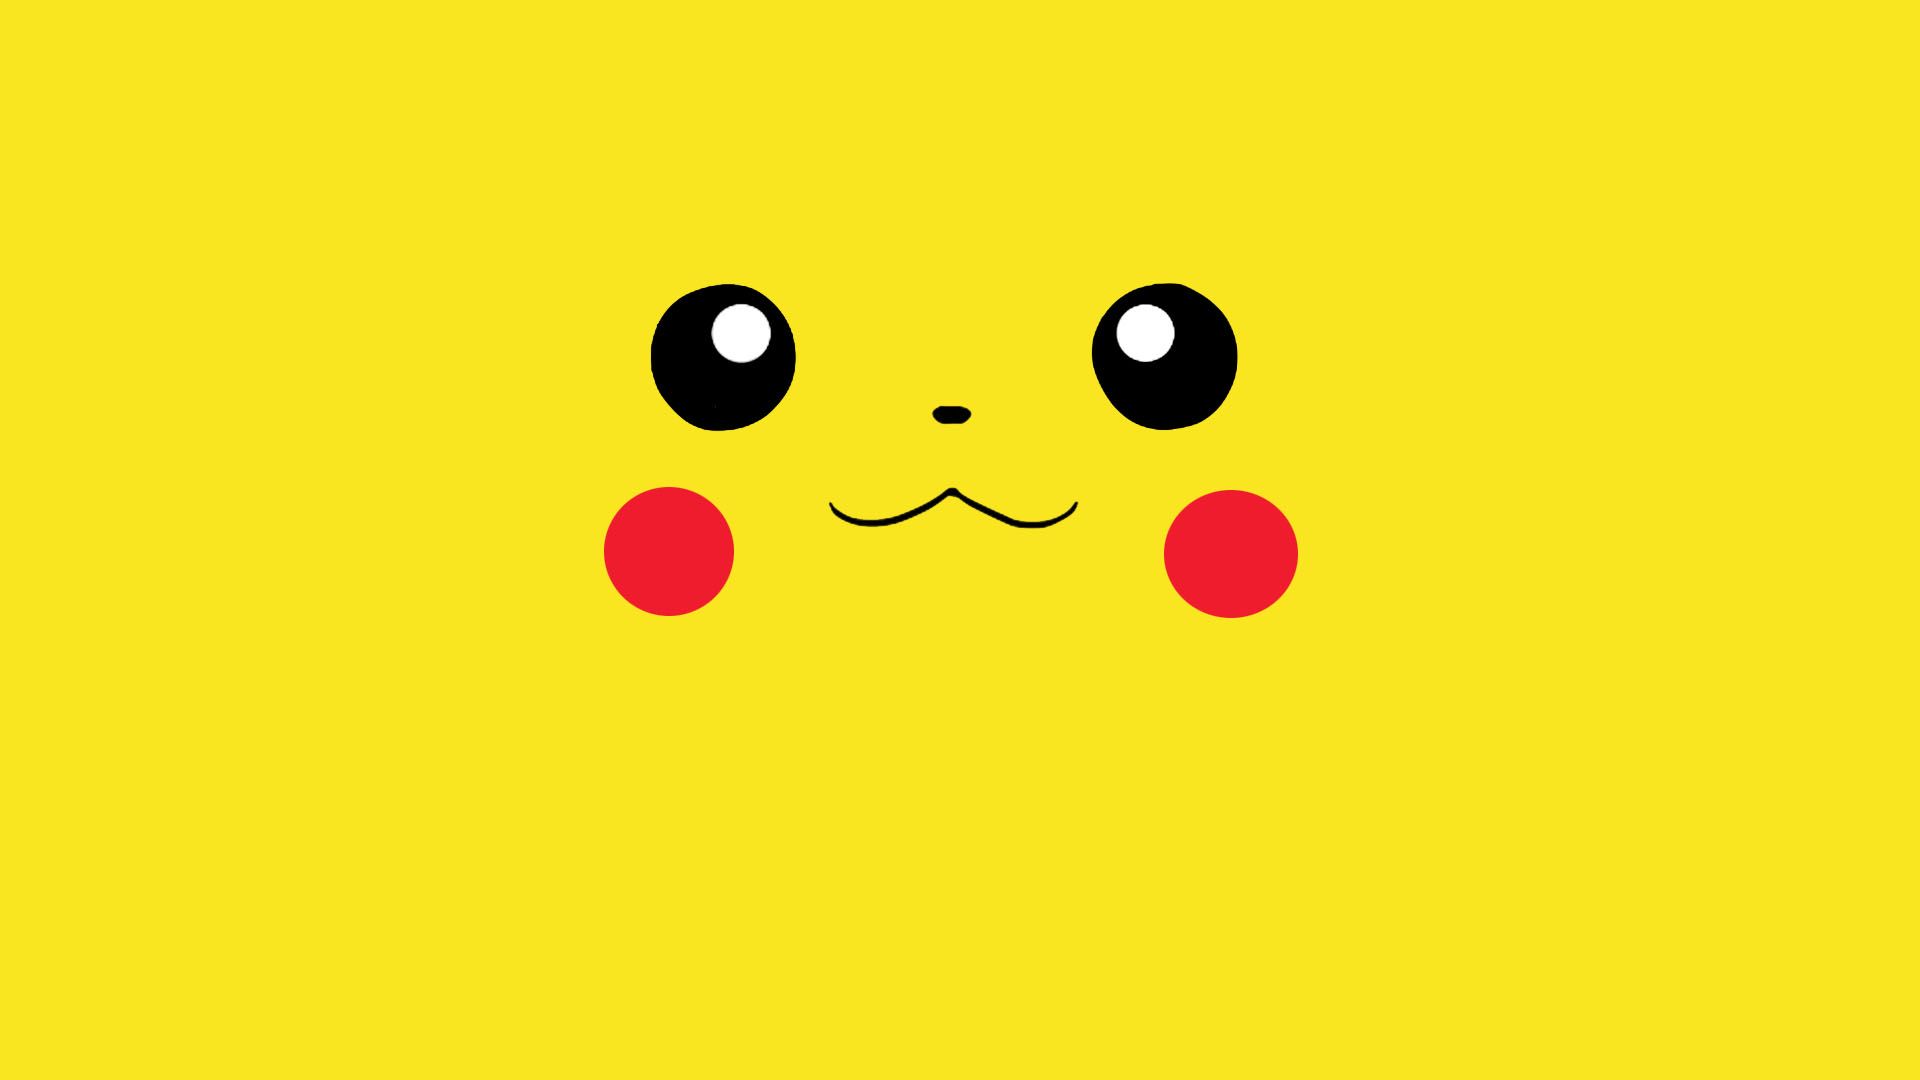 A yellow background with pokemon's face on it - Pikachu